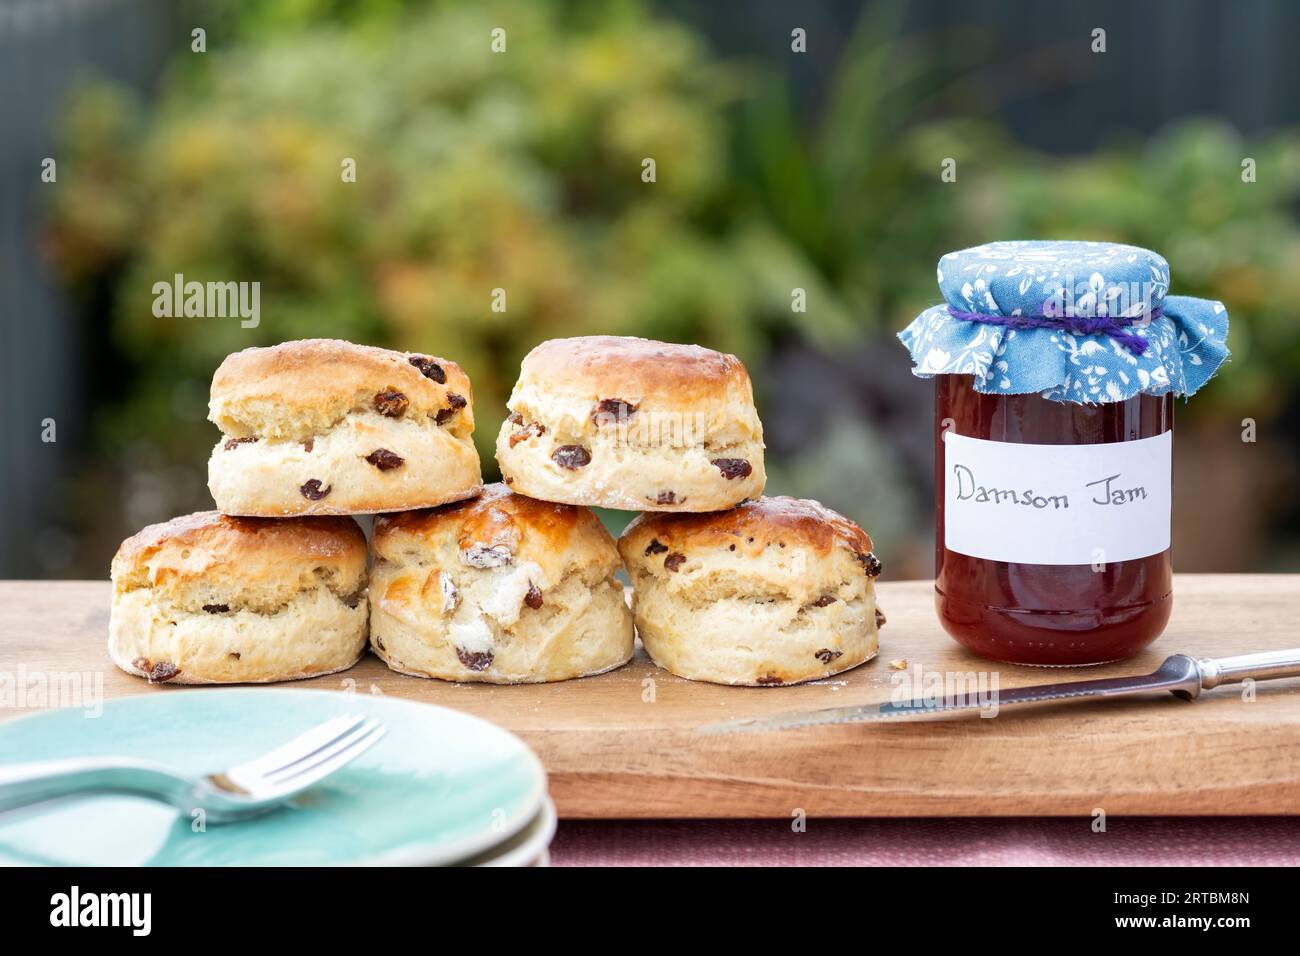 A freshly baked batch of fruit scones displayed on a serving board with a jar of homemade Damson Jam. All served to an outdoor table Stock Photo